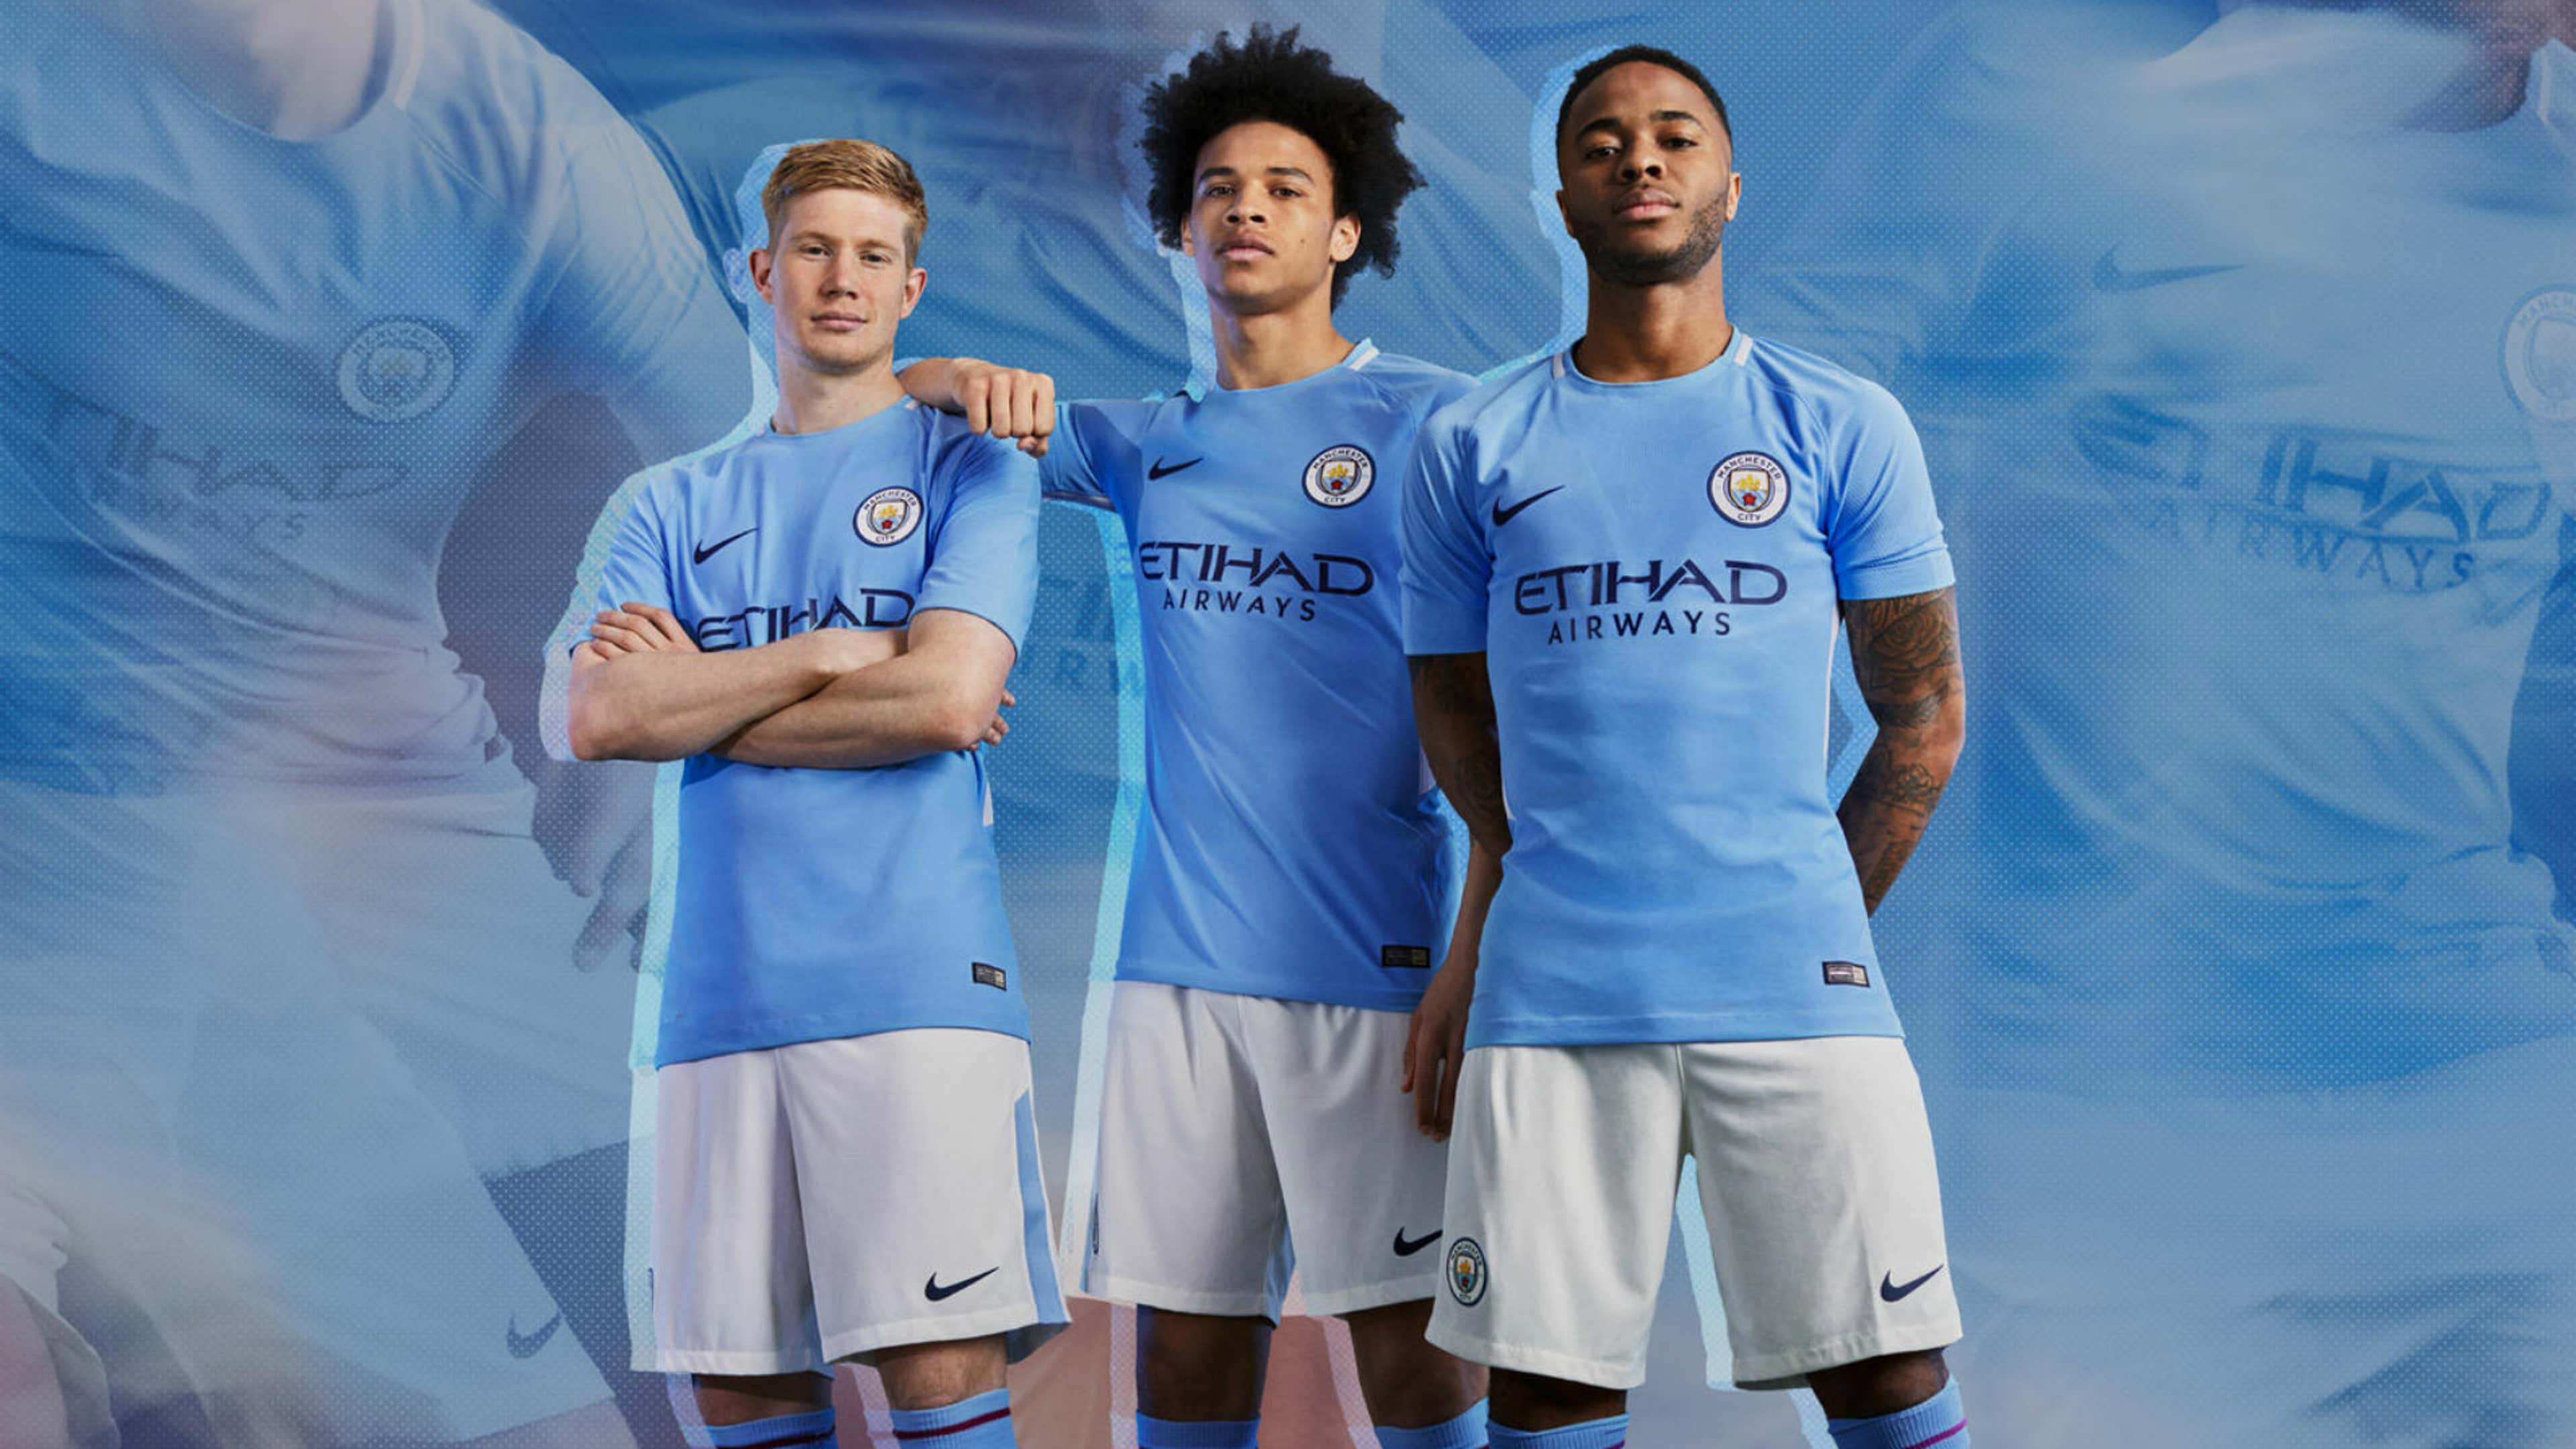 Man City 2017-18 kit: Manchester City unveil new jersey for 2017